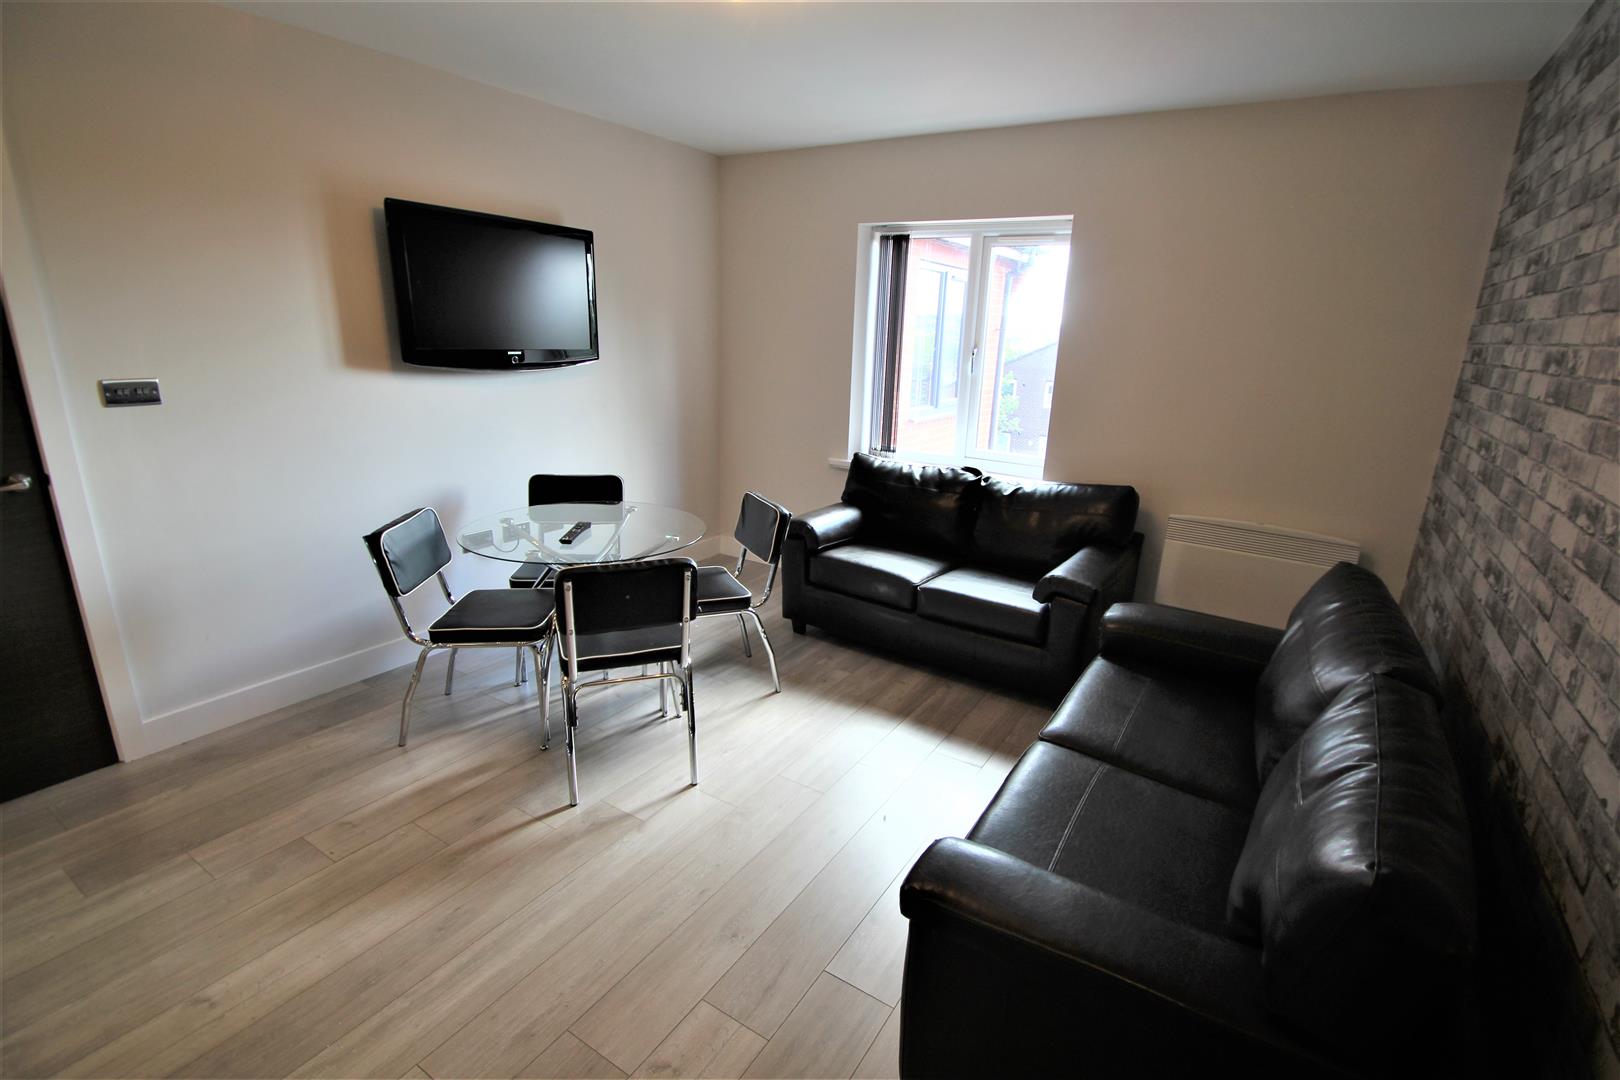 Hartisca Residence, Hartwell Road, Hyde Park, Leeds. LS6 1RY Image